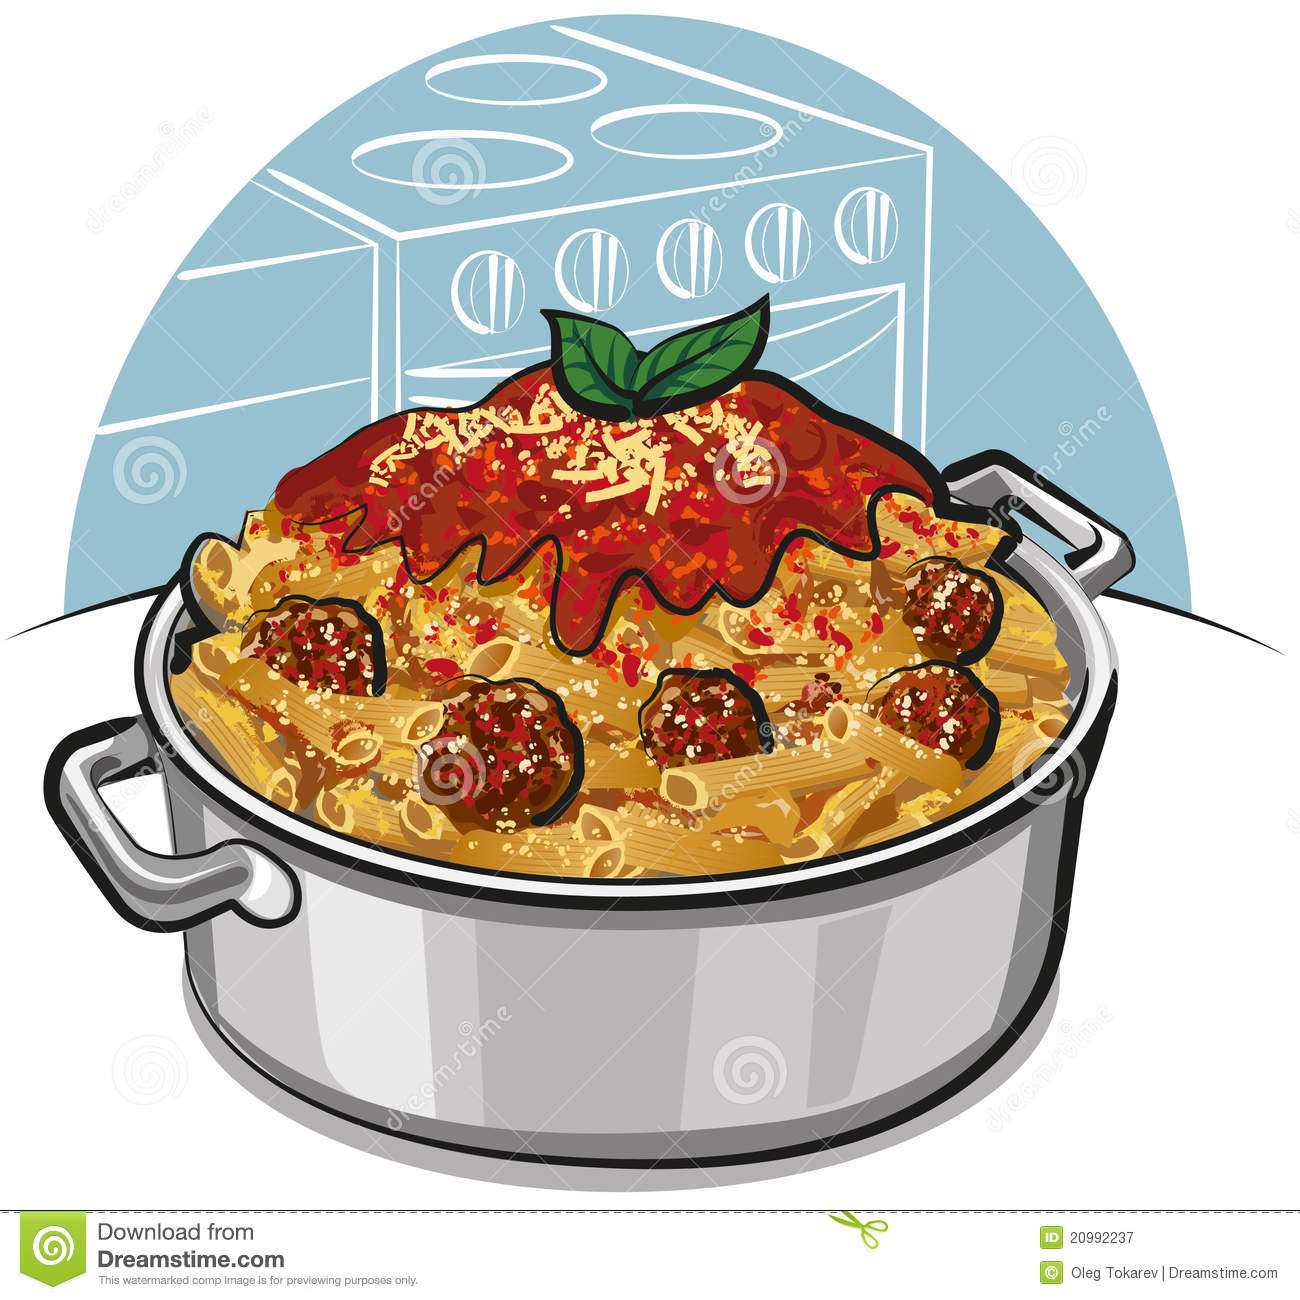 Rigatoni Pasta With Meatballs Royalty Free Stock Photography   Image